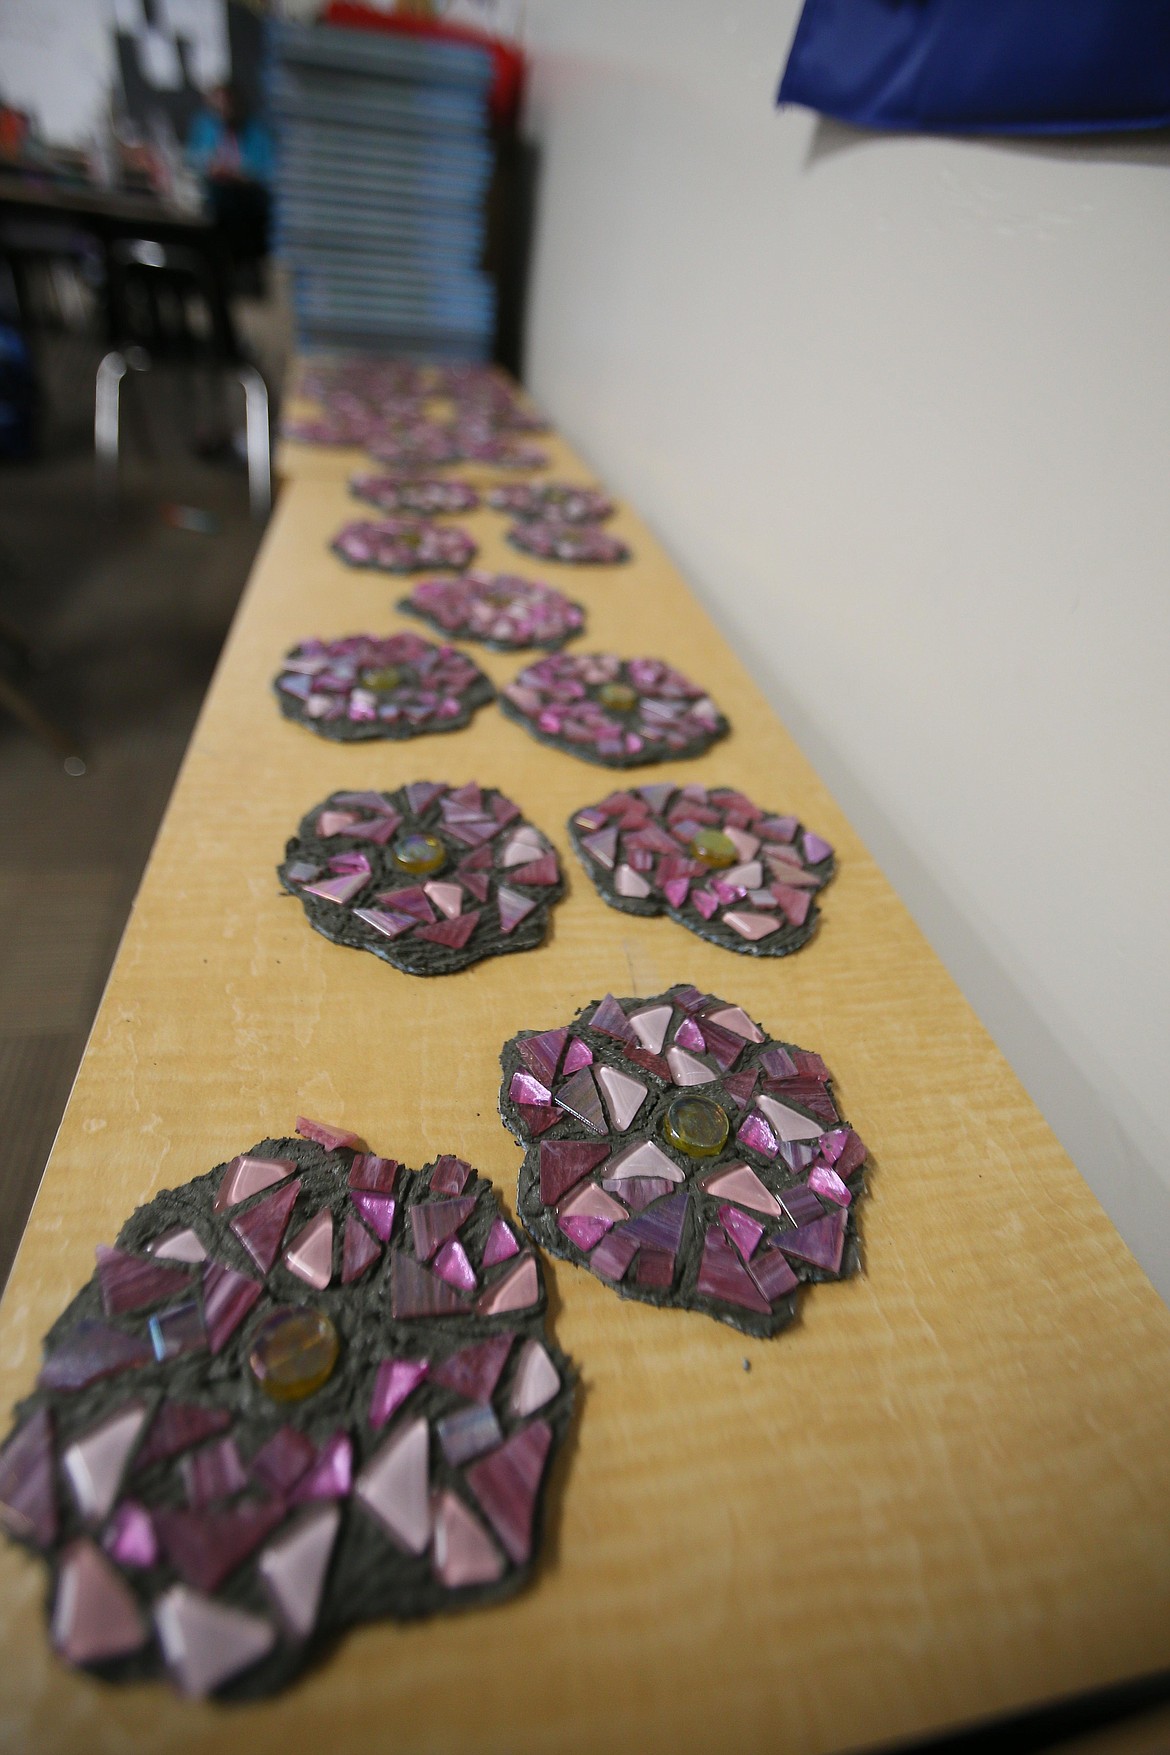 Wild rose mosaic pieces created in Heather Schreiber's third grade class will be added to the mural that will be installed on a wall outside of Sorensen Magnet School this spring.